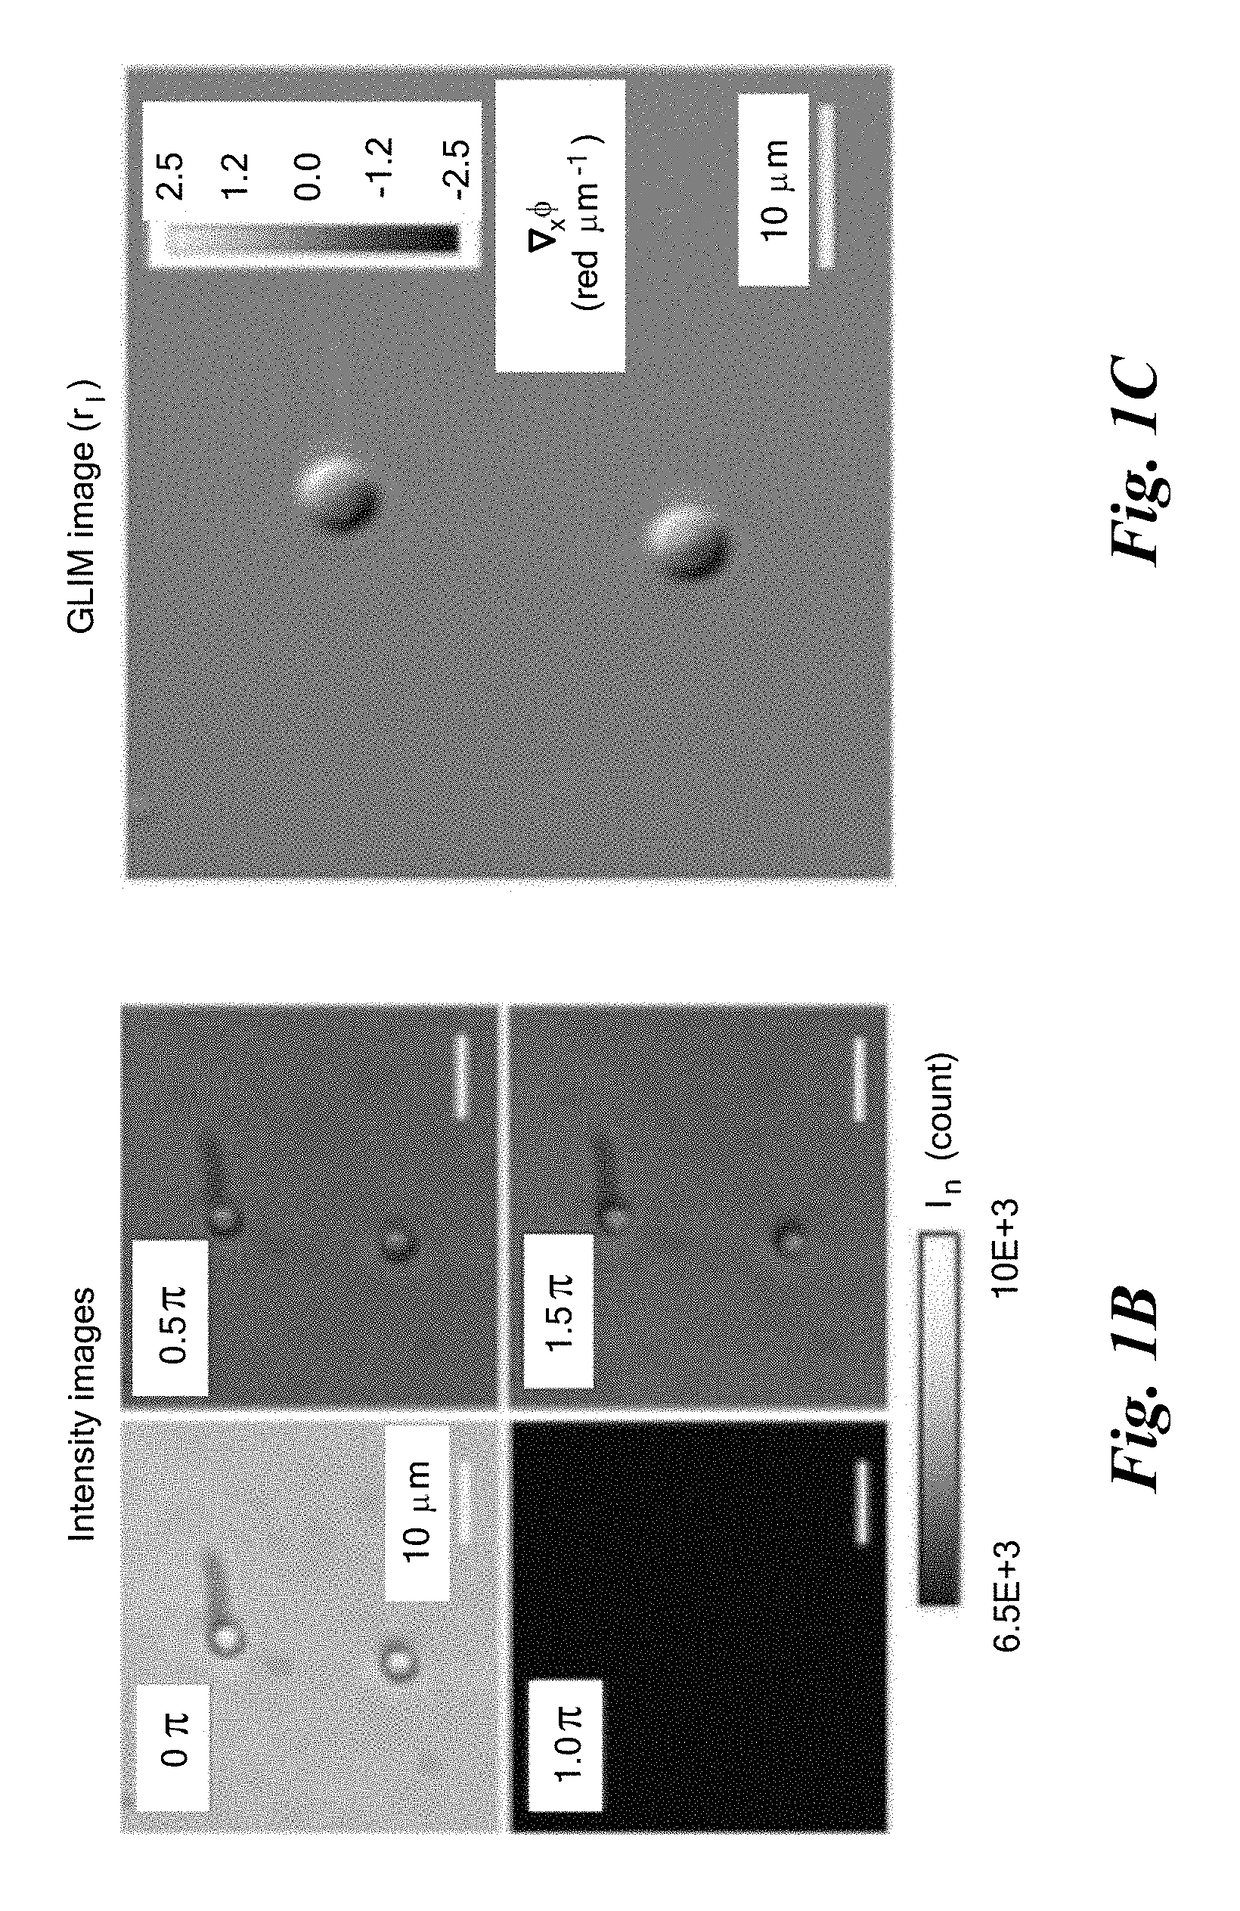 Gradient light interference microscopy for 3D imaging of unlabeled specimens